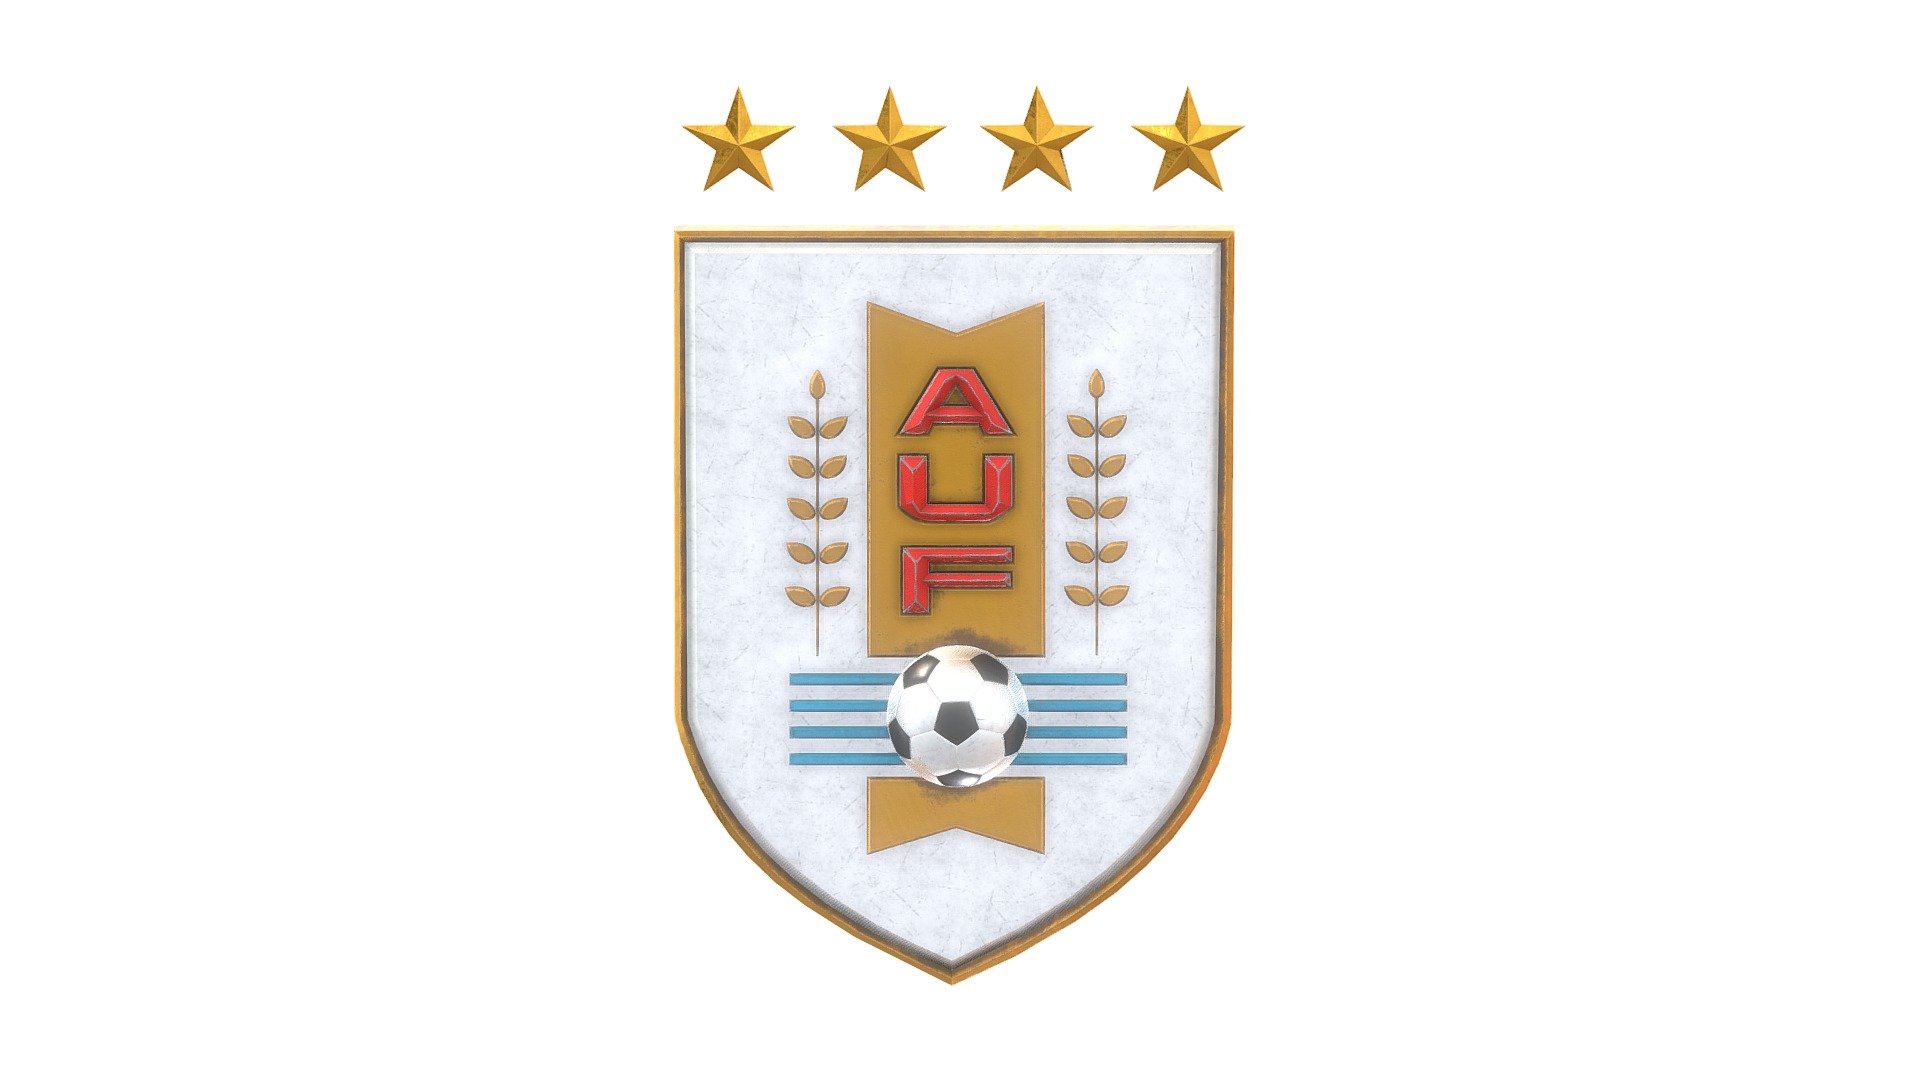 3D stylized badge of Uruguay national football team, one of the teams qualified for the FIFA World Cup 2022.

This event it’s scheduled to take place in Qatar from 21 November to 18 December 2022

Made with Blender and Substance Painter 3d model